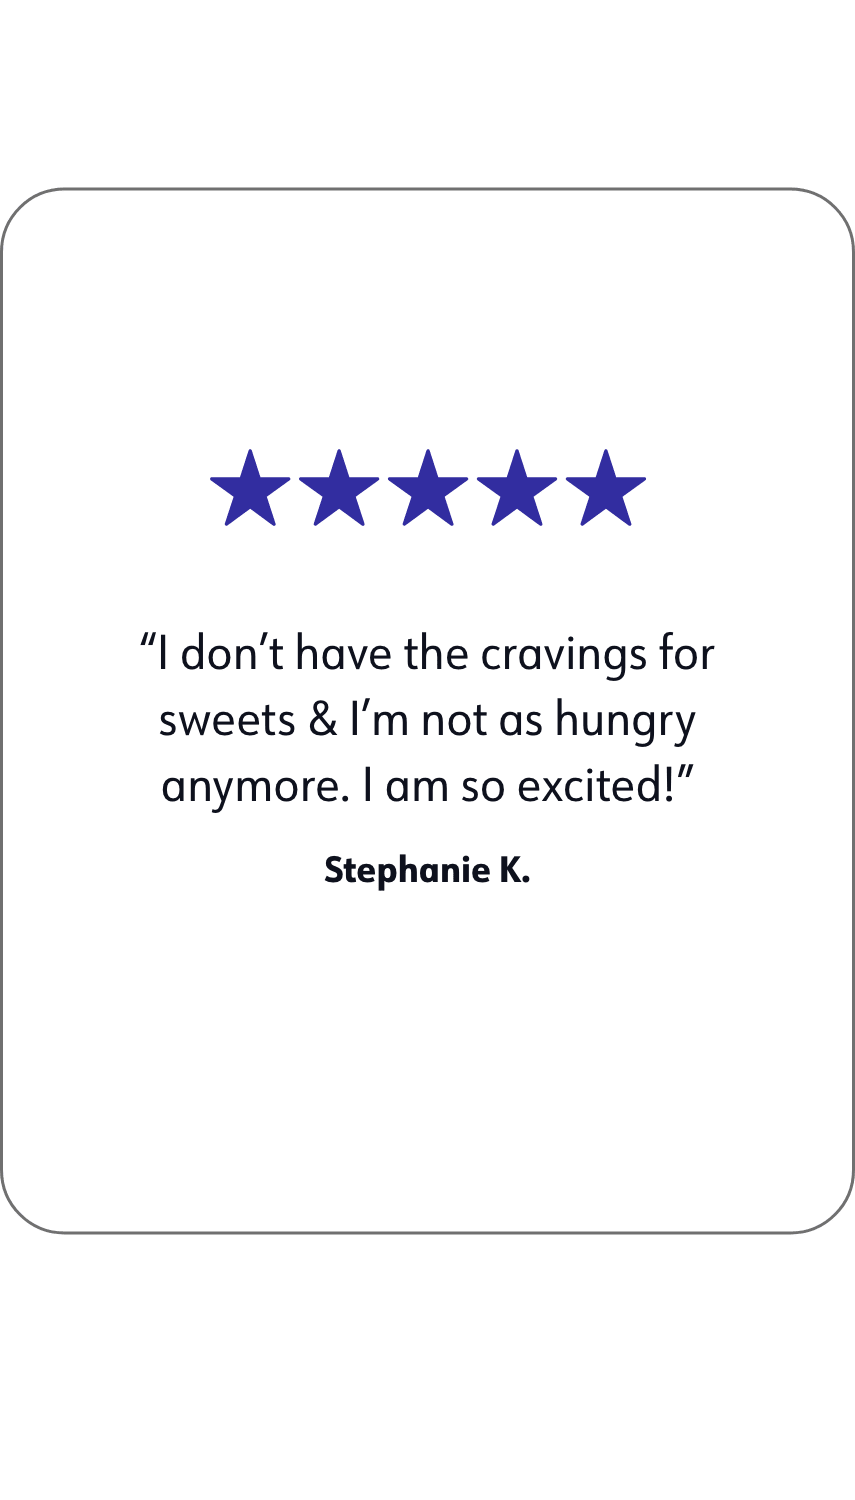 A quote of WW member Stephanie K.that says: I don't have the cravings for sweets & I'm not as hungry anymore. I am so excited!